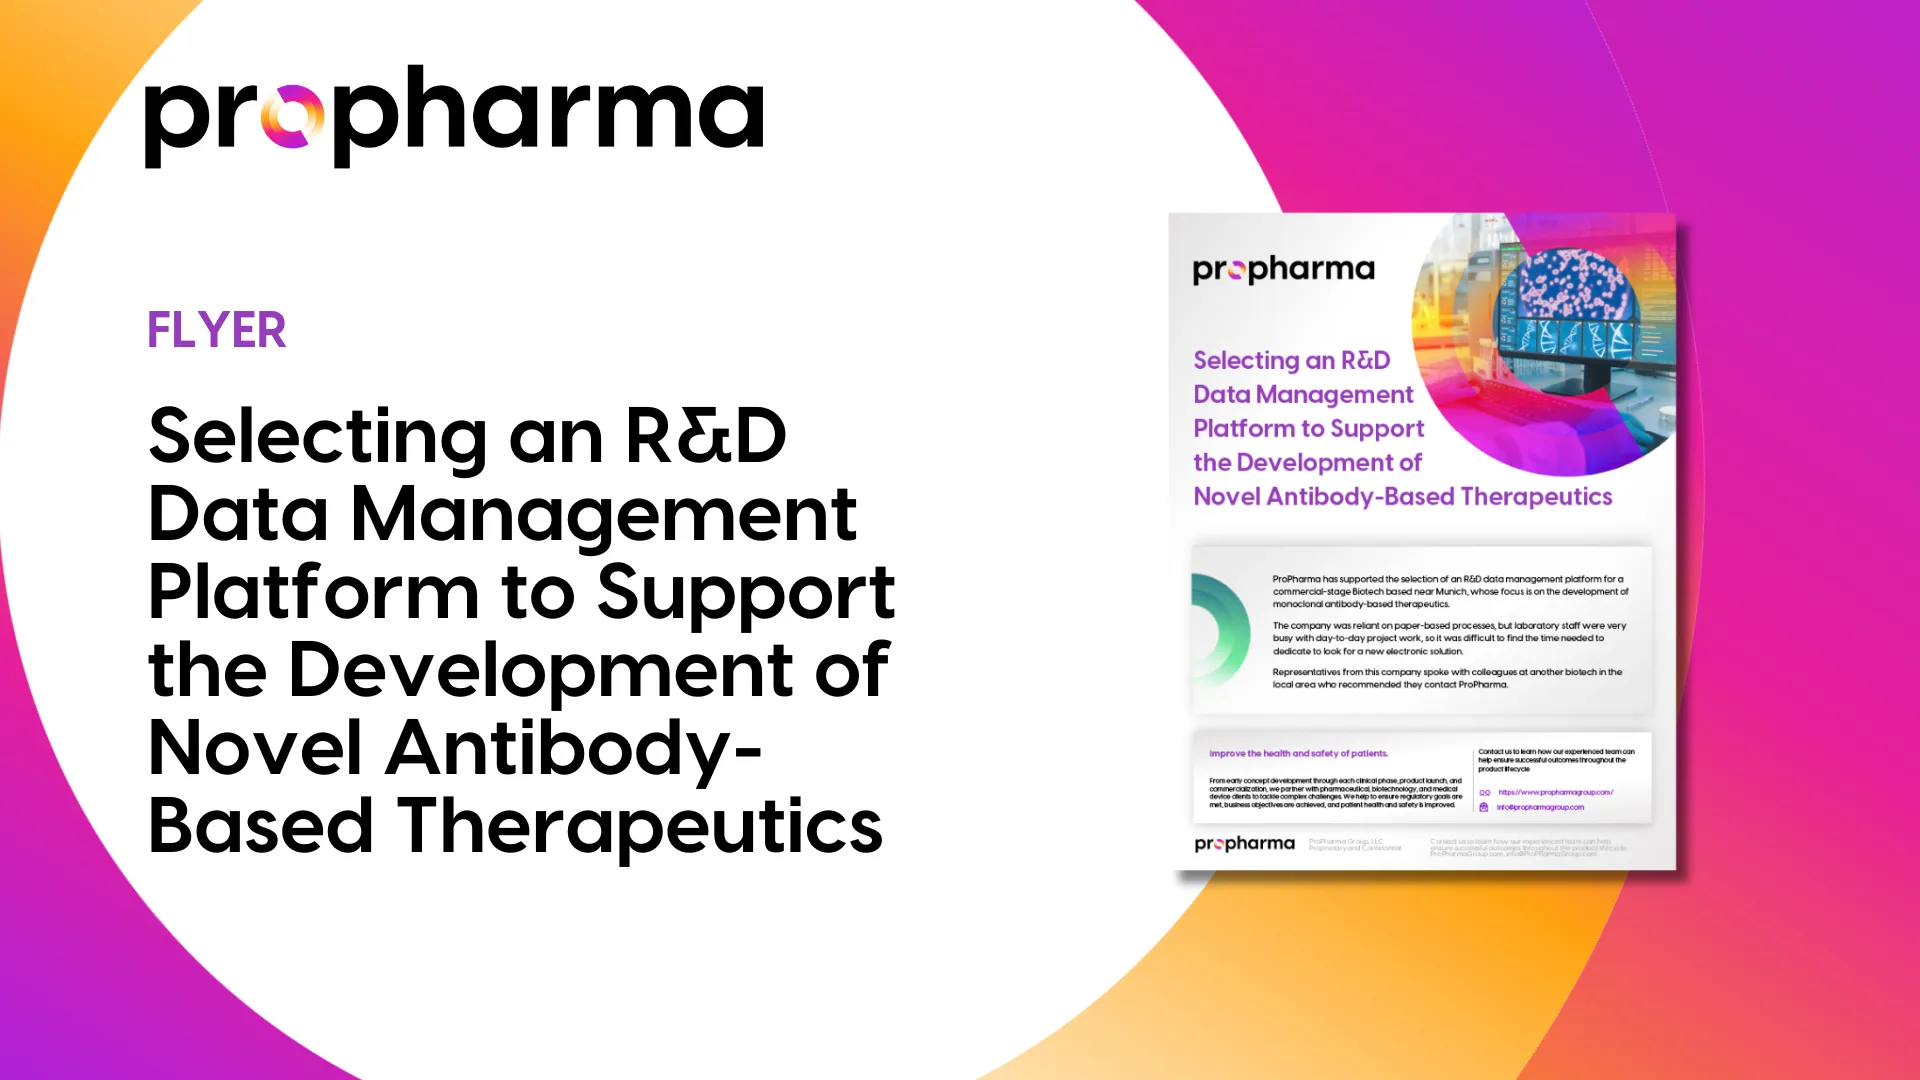 Selecting an R&D Data Management Platform to Support the Development of Novel Antibody-Based Therapeutics